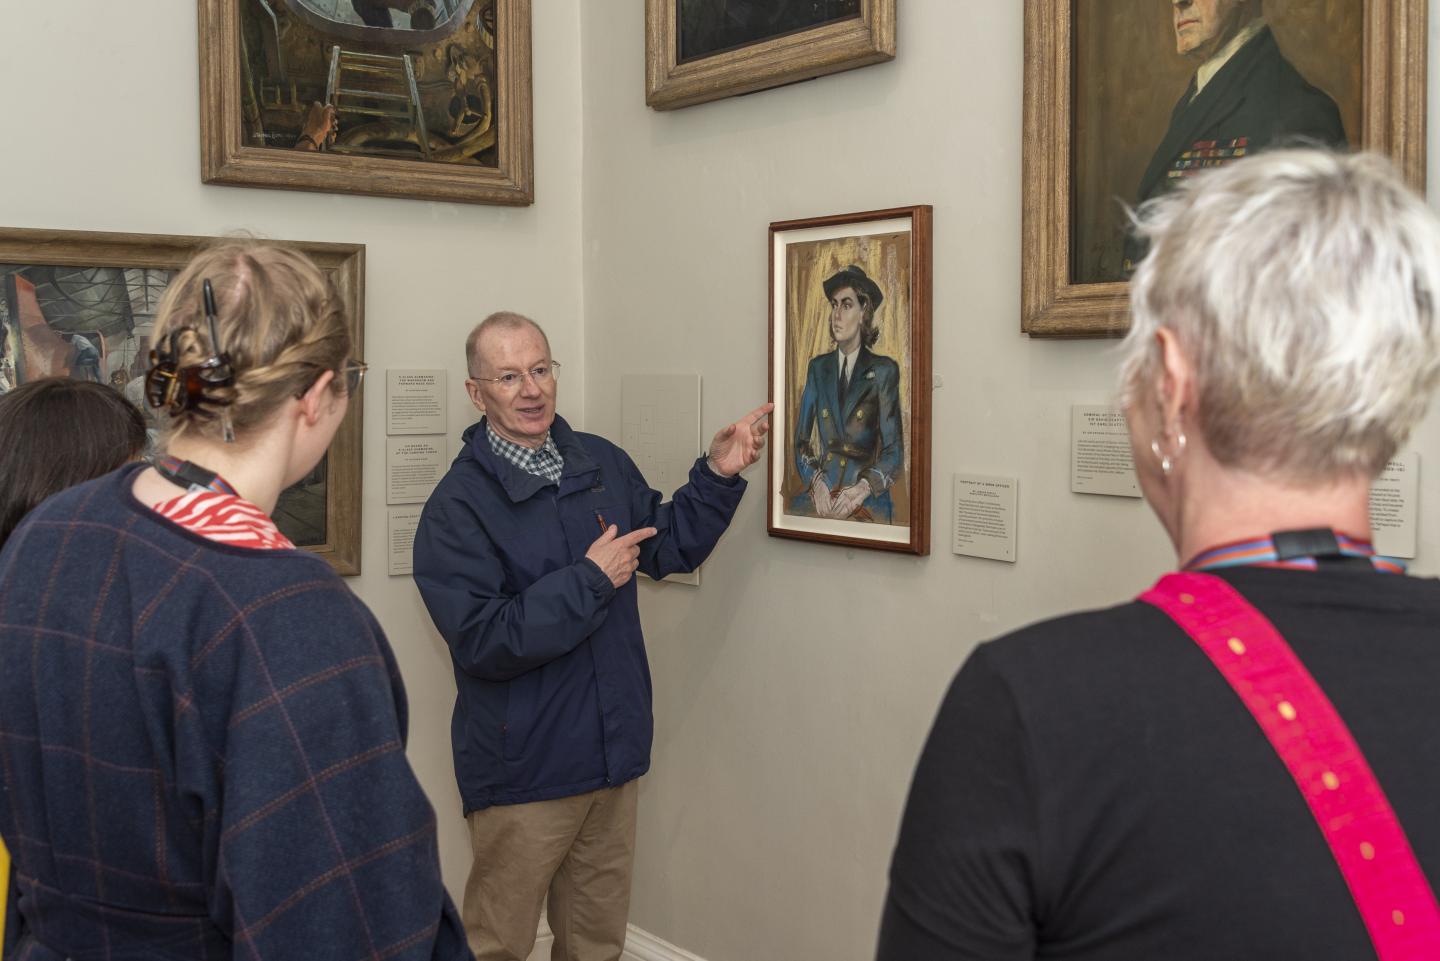 A group of visitors listen to a guide discussing a painting